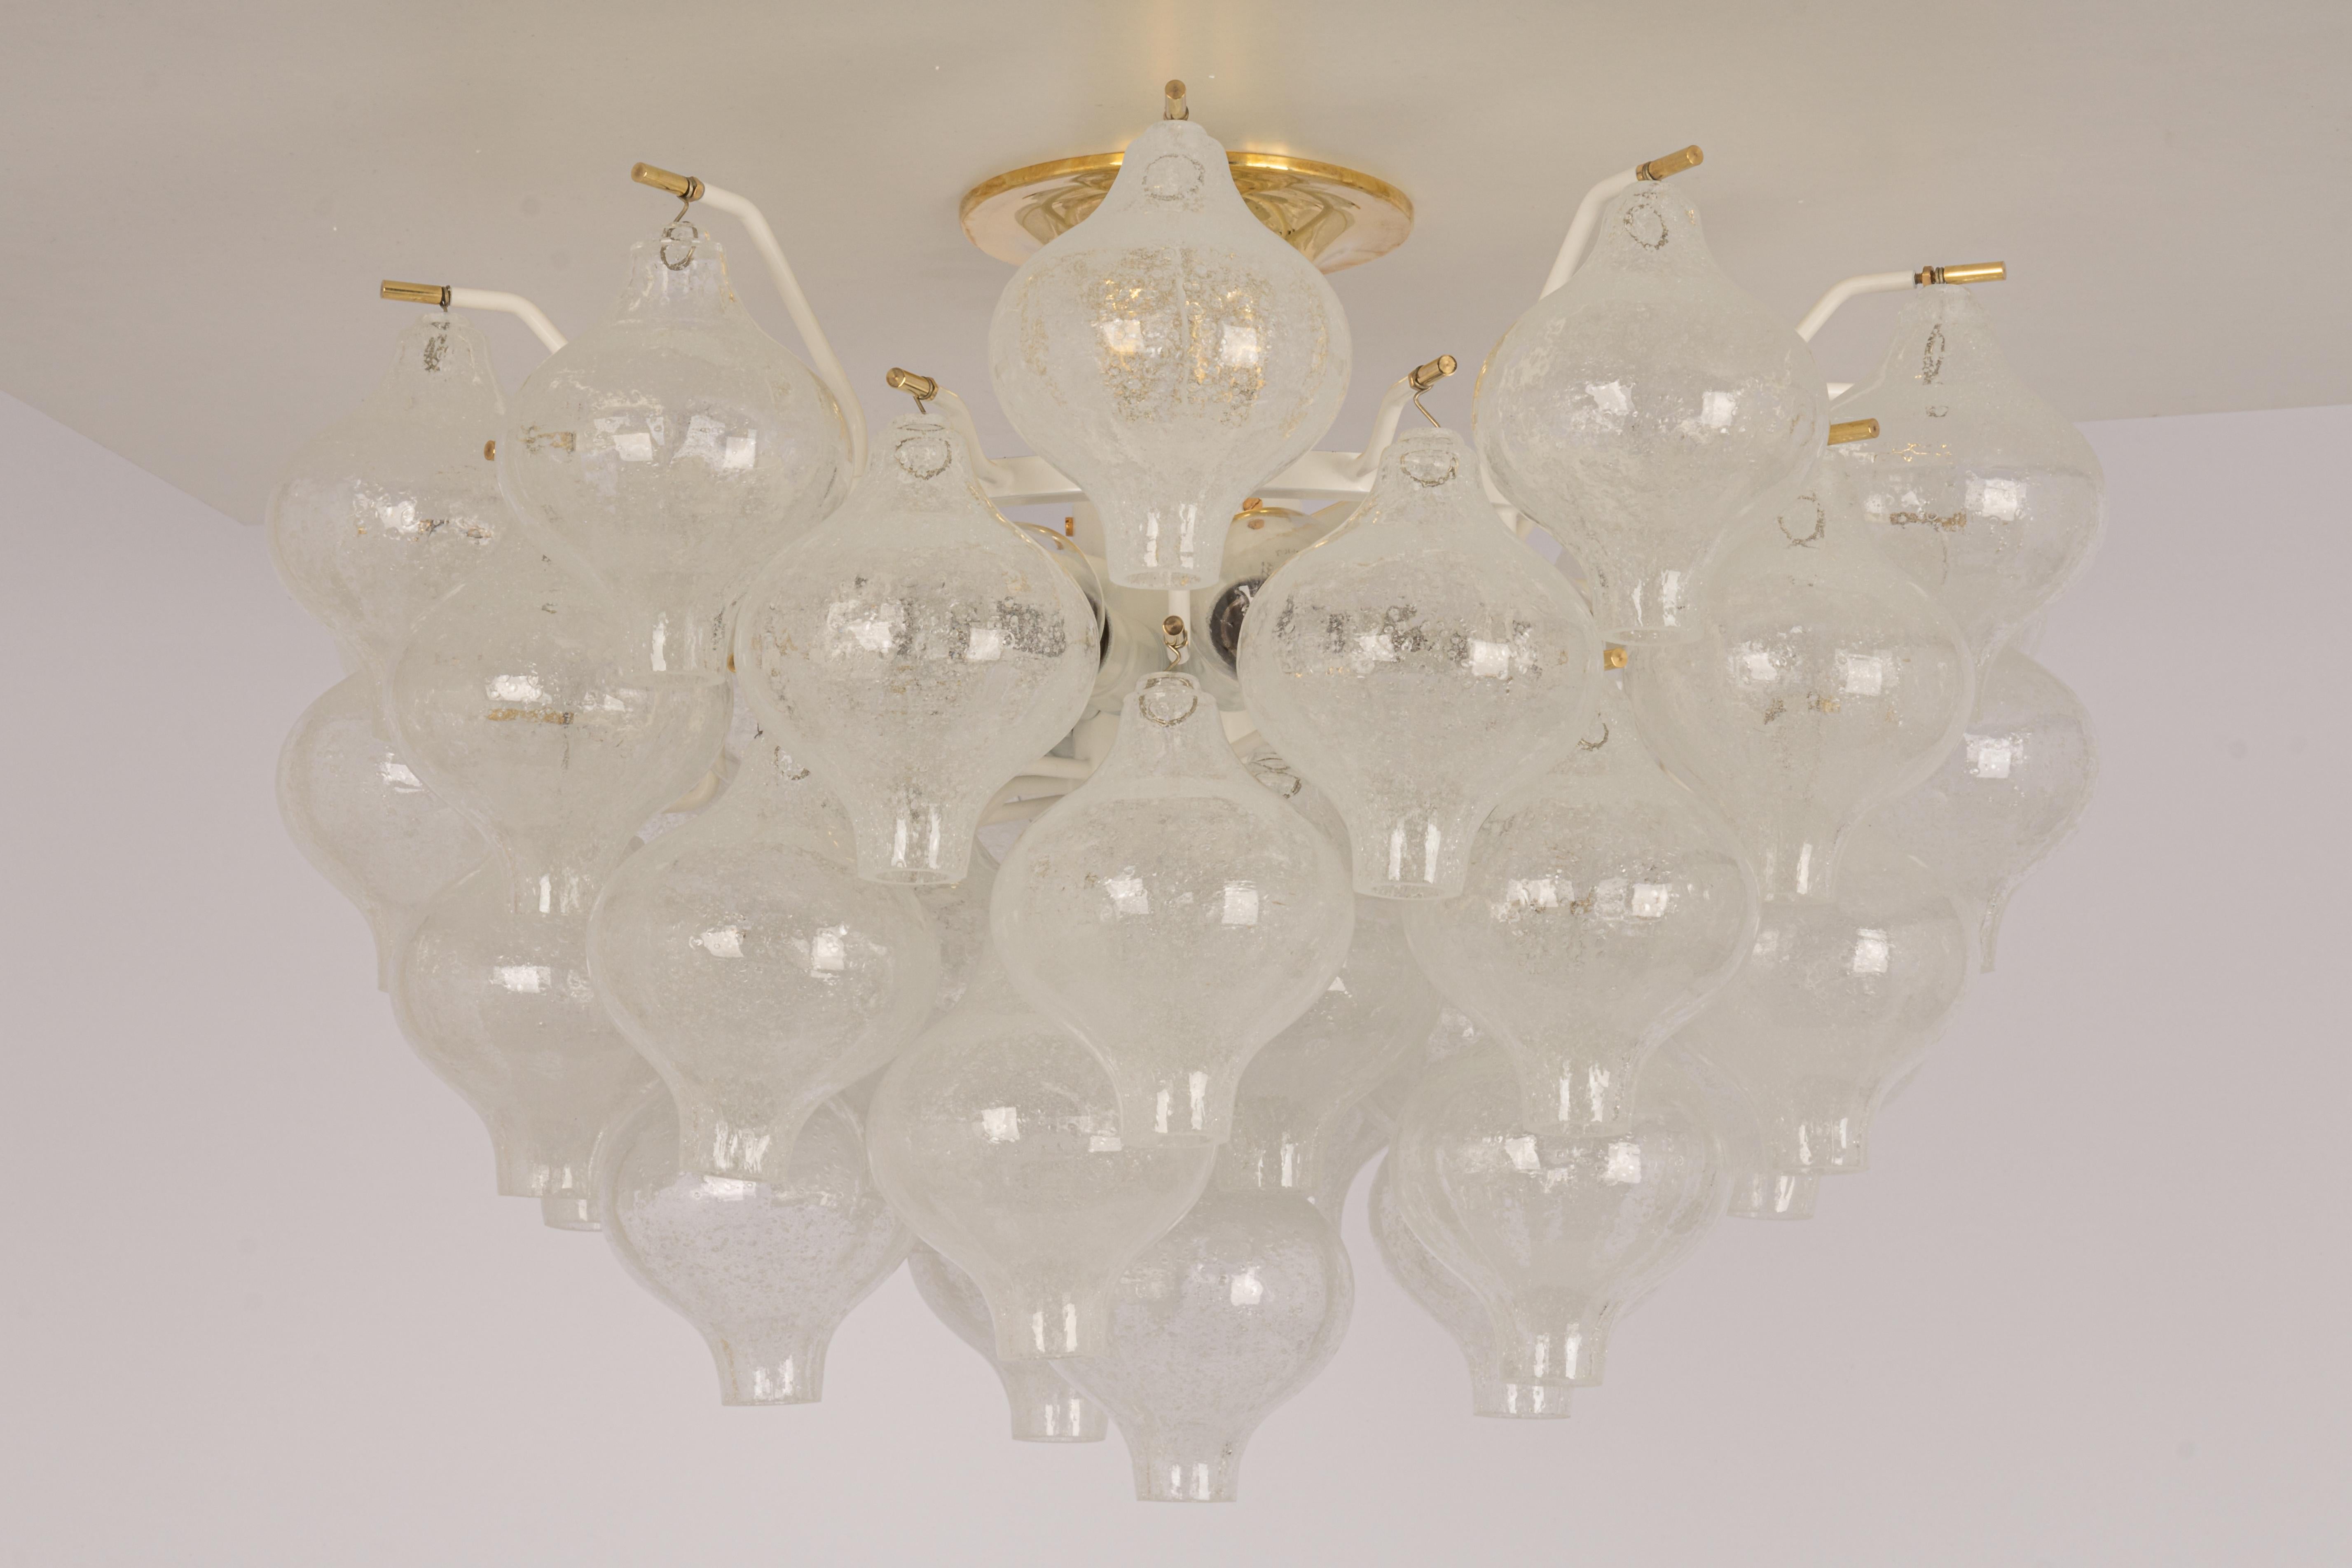 1 of 2 Wonderful onion-shaped -Tulipan glass chandelier or flush mount. A large number of hand-blown glasses were suspended on a white painted metal frame and brass canopy.
Best of design from the 1960s by Kalmar, Austria. High quality of the